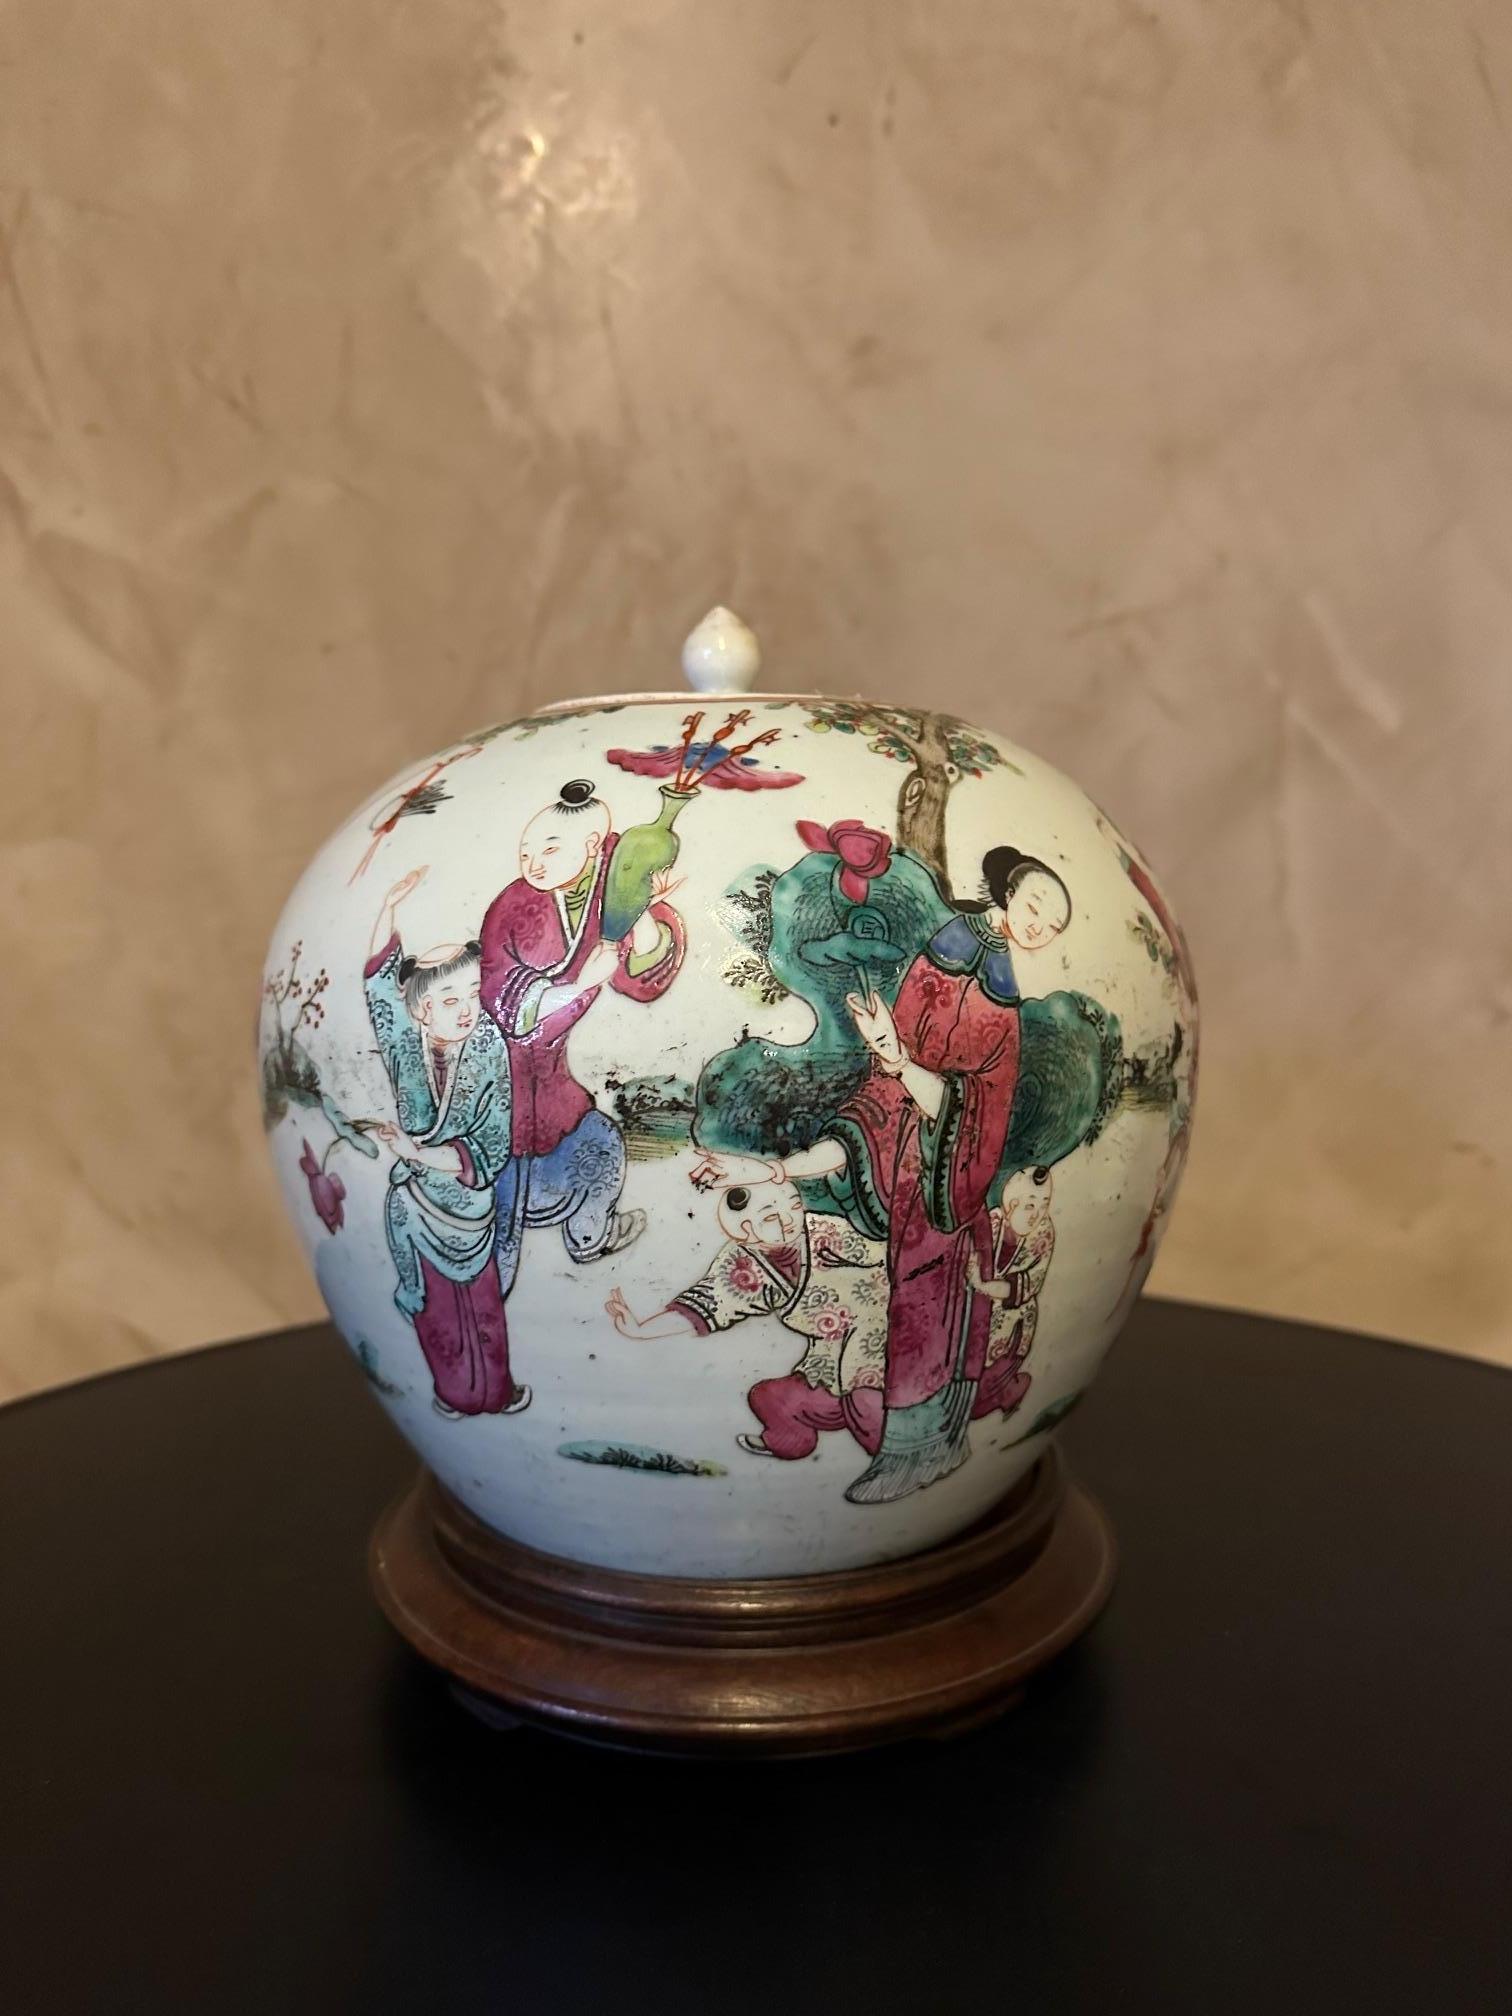 Chinese Famille Rose enameled porcelain ginger pot dating from the beginning of the 20th century decorated with a woman surrounded by children playing in a garden. Paint slightly discolored over time.
Wooden base. Beautiful piece.